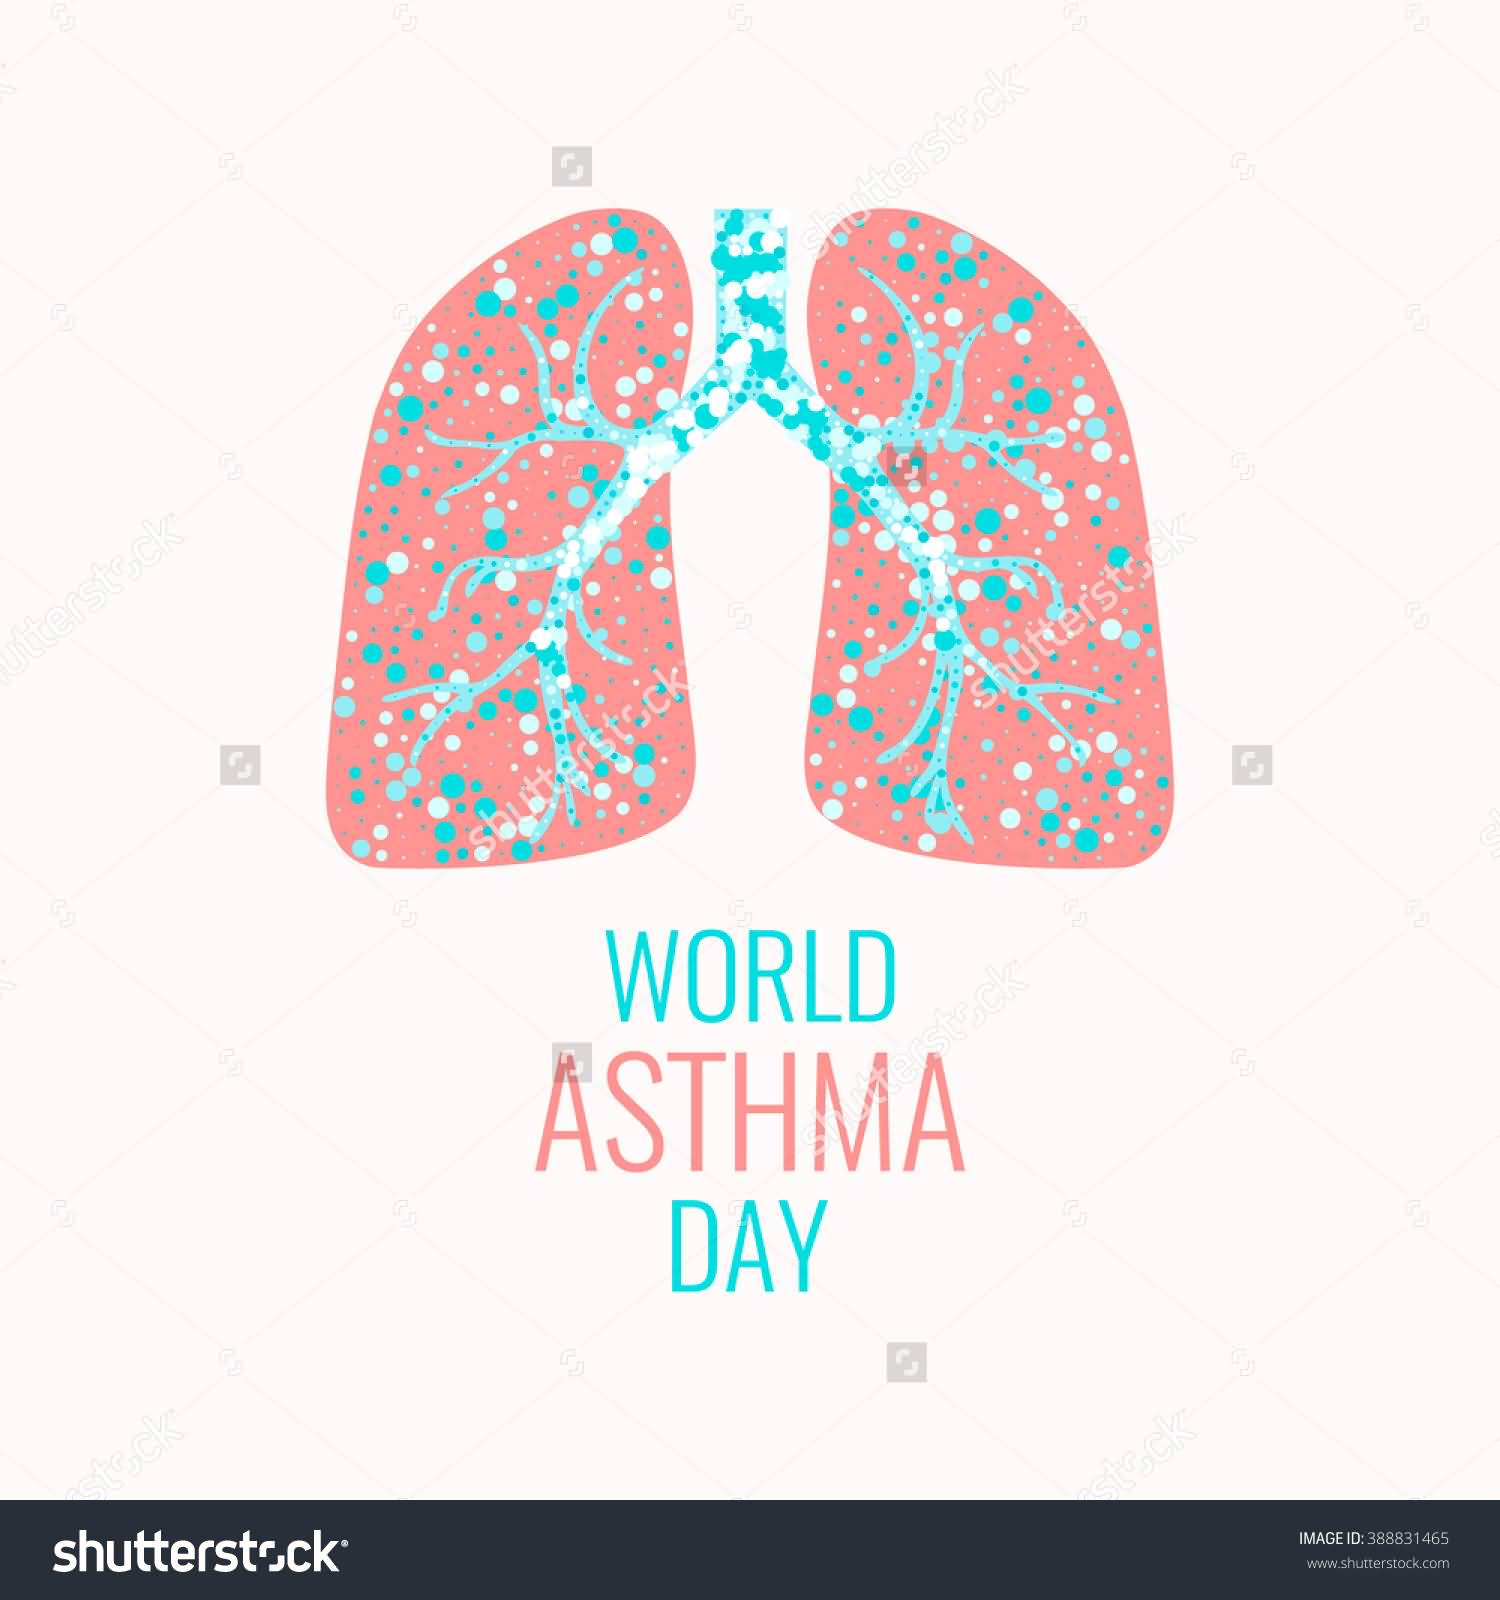 World Asthma Day Lungs With Air Bubbles Poster Illustration